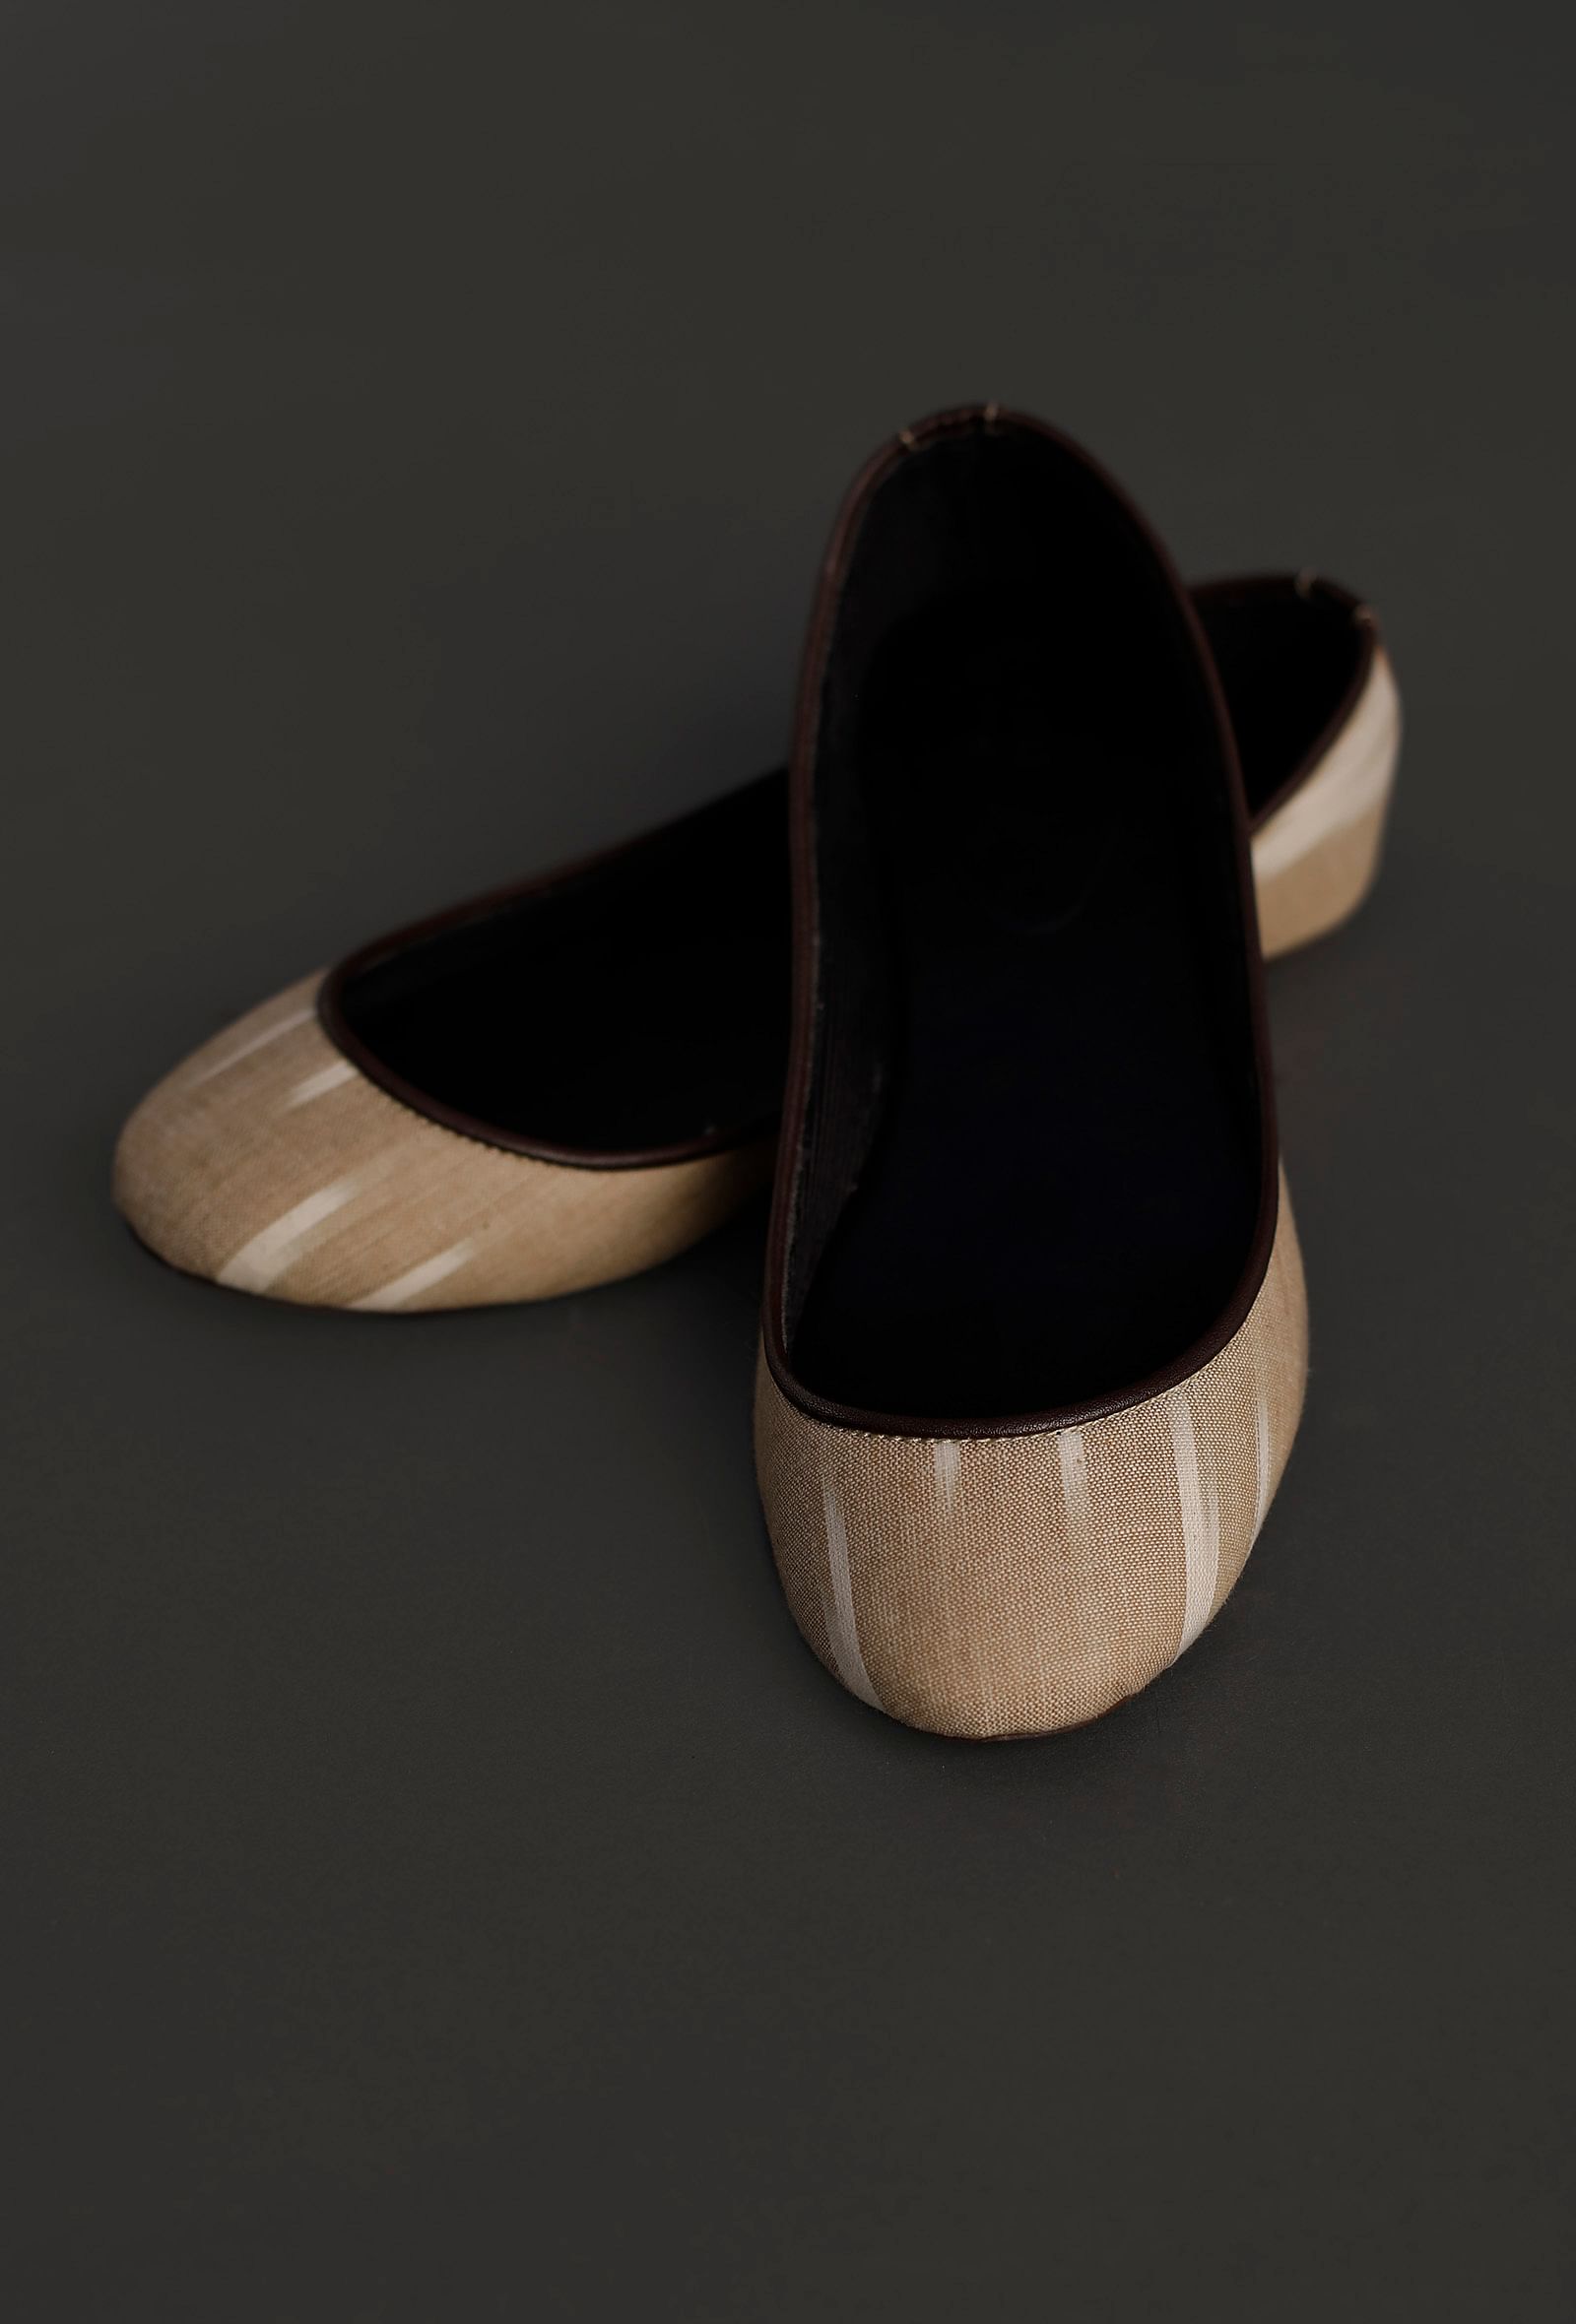 White and Beige Ikat Cruelty Free Leather Flat Ballerinas